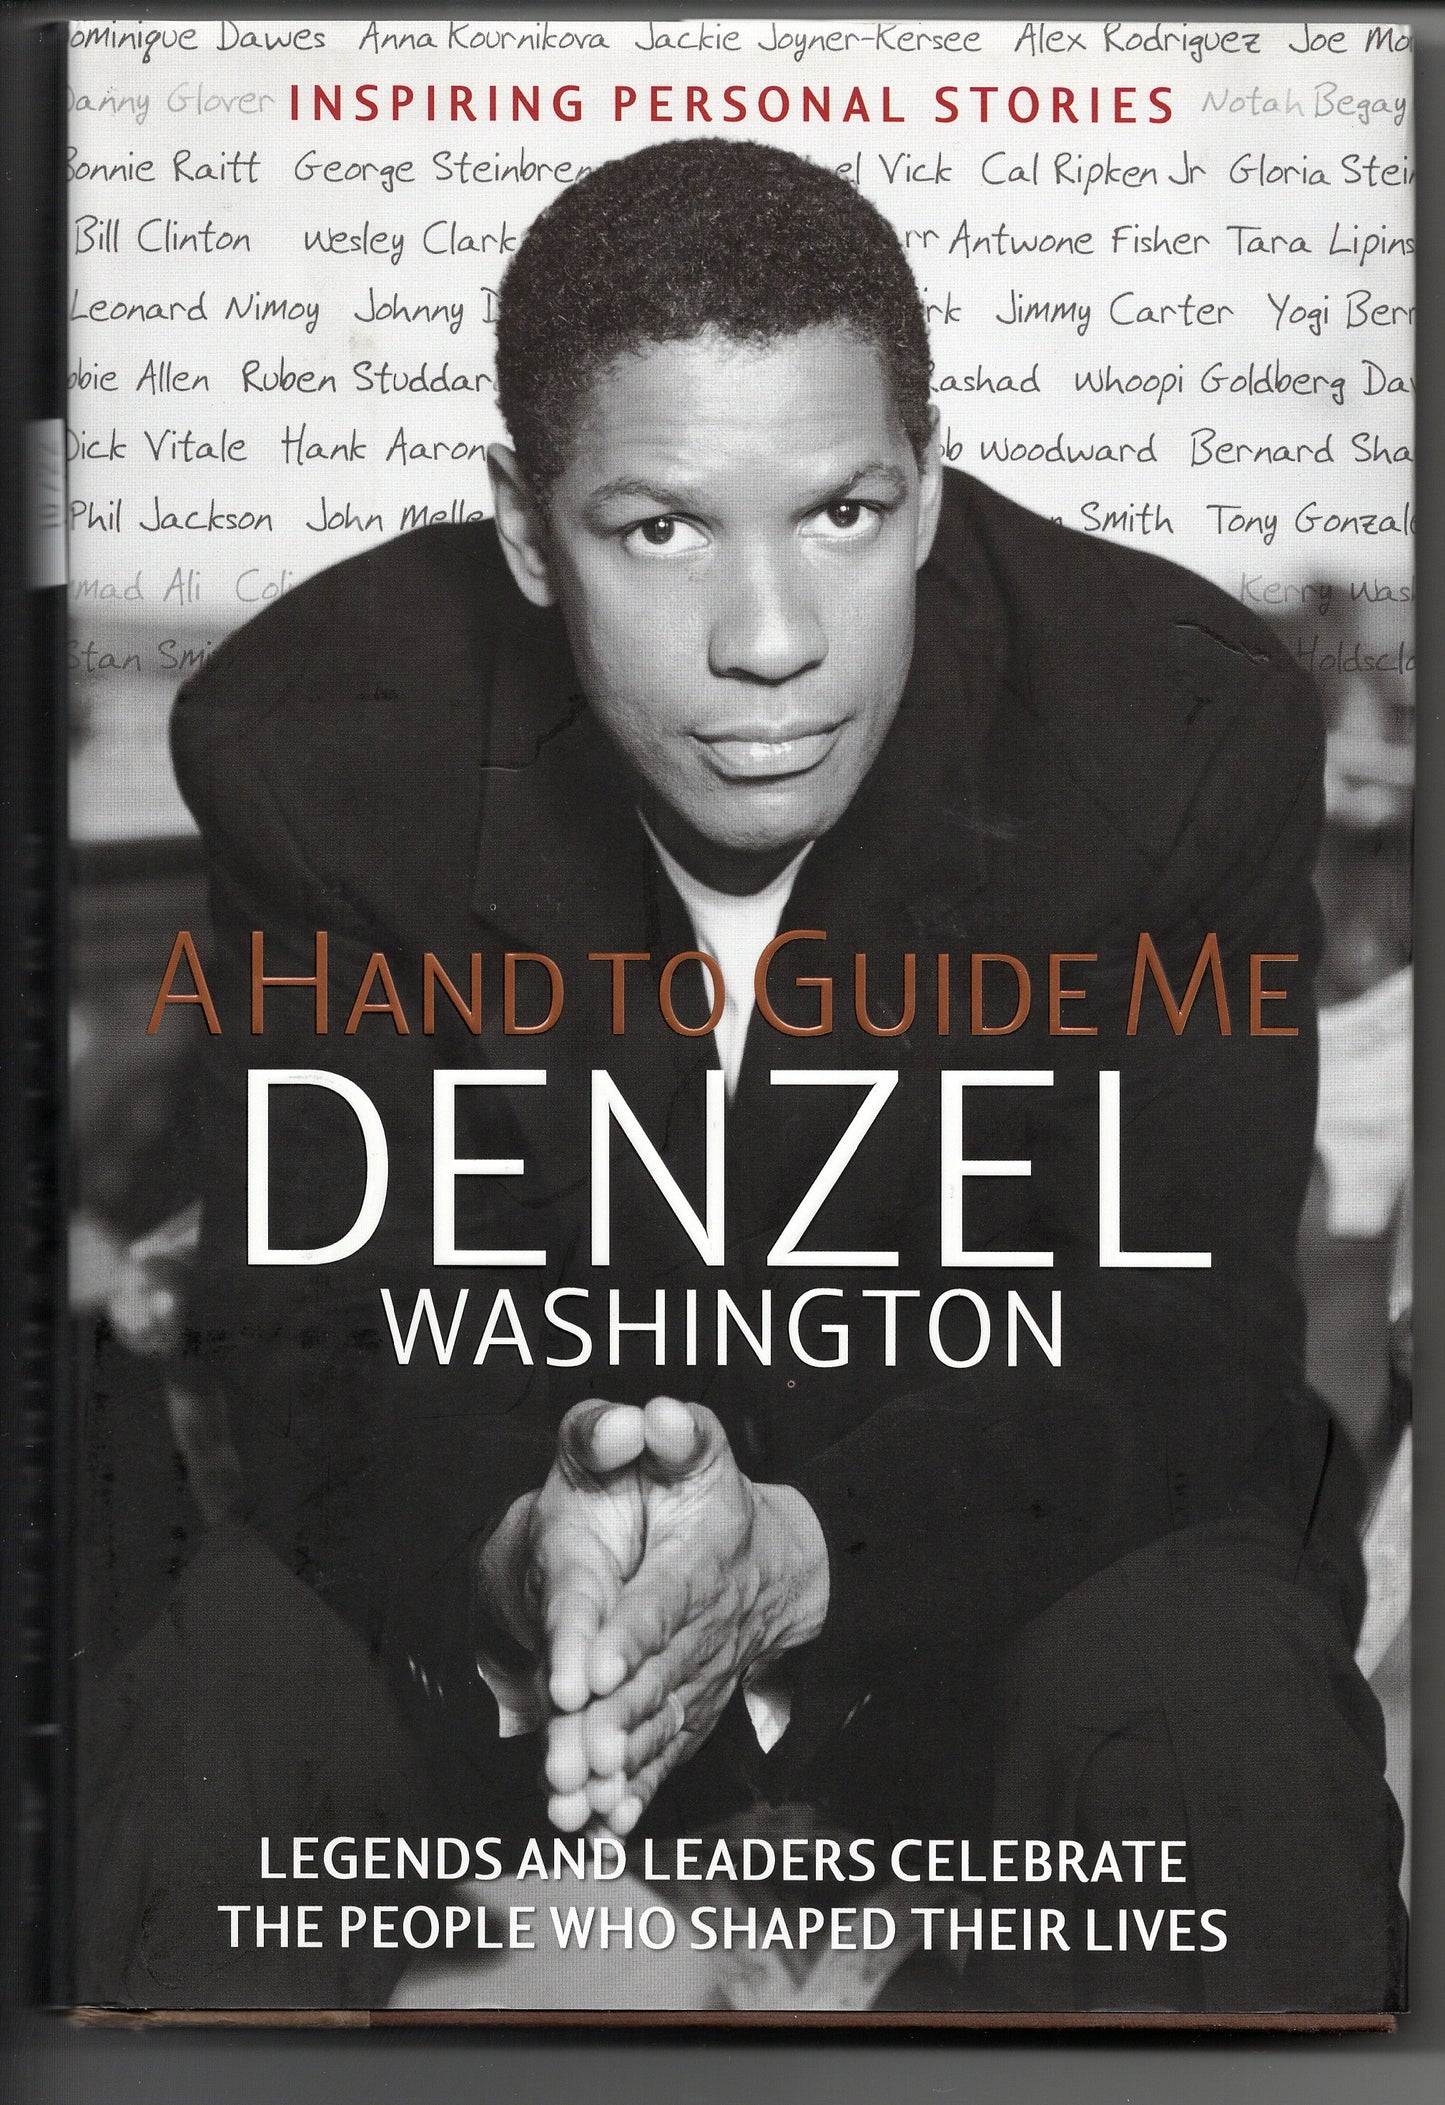 A Hand To Guide Me by Denzel Washington